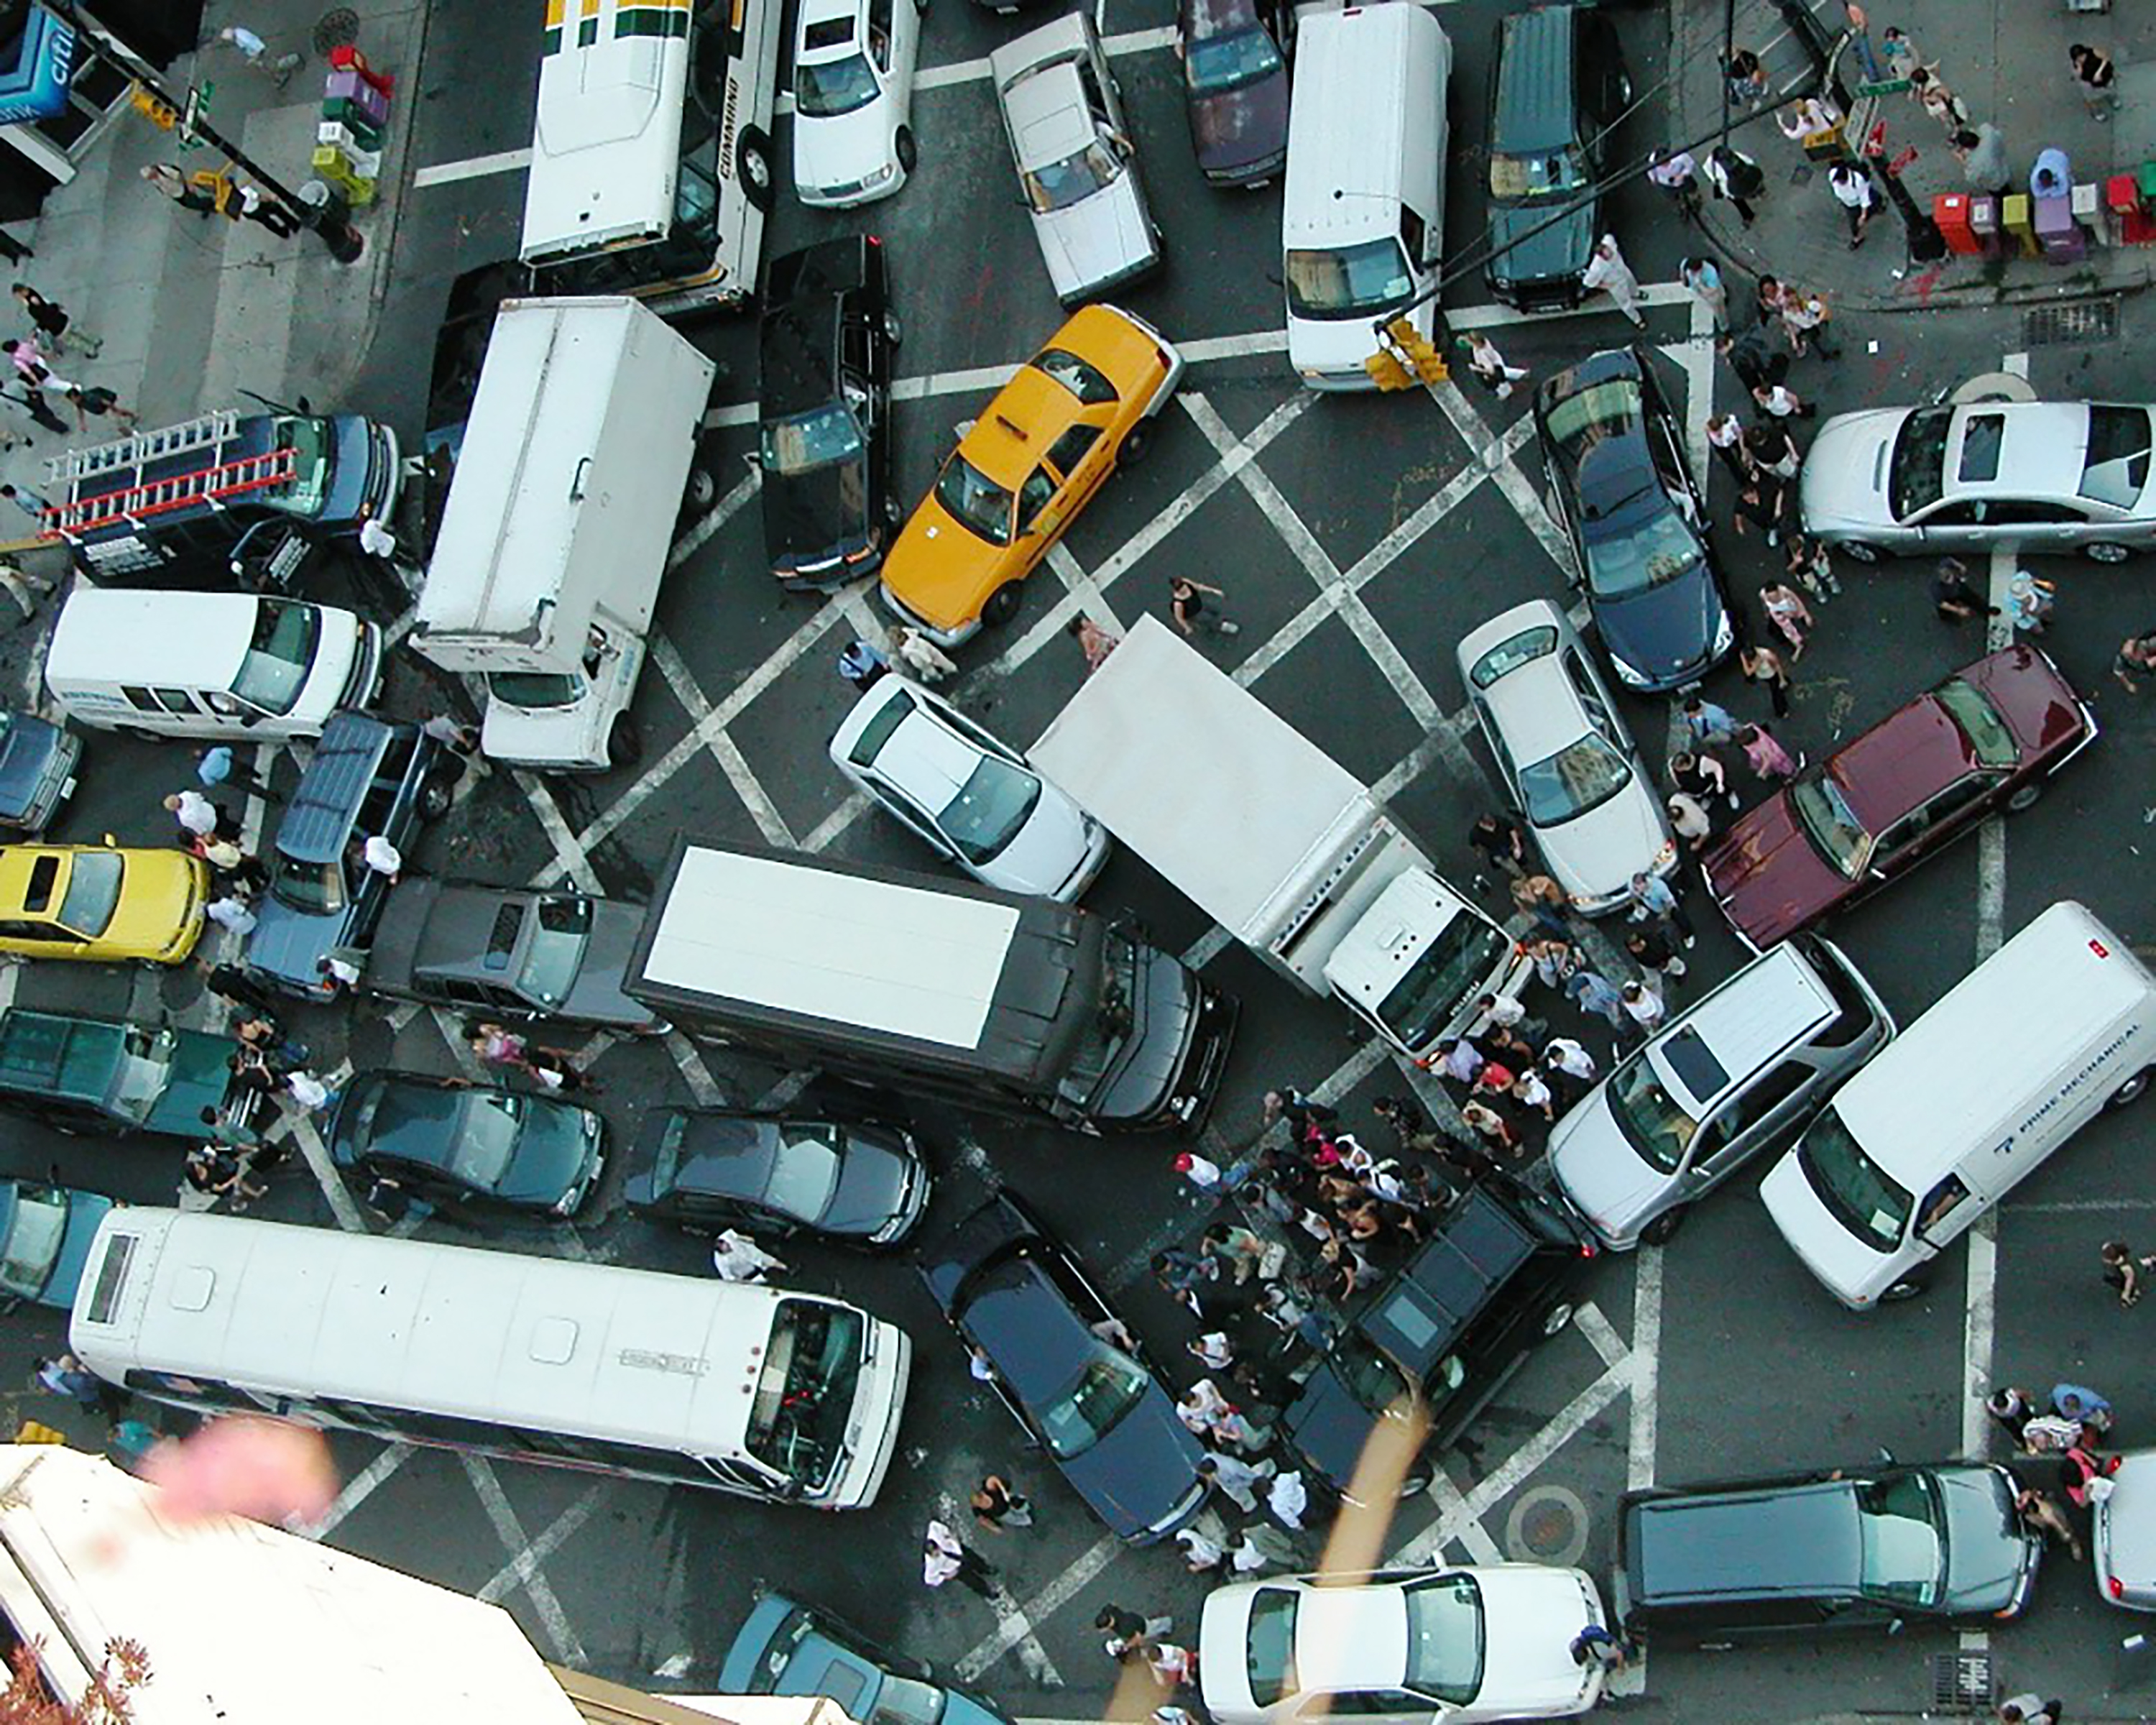 Actual gridlock in Manhattan in 2007.

Credit: Rgoogin at the English Wikipedia [CC BY-SA 3.0 (http://creativecommons.org/licenses/by-sa/3.0/)]